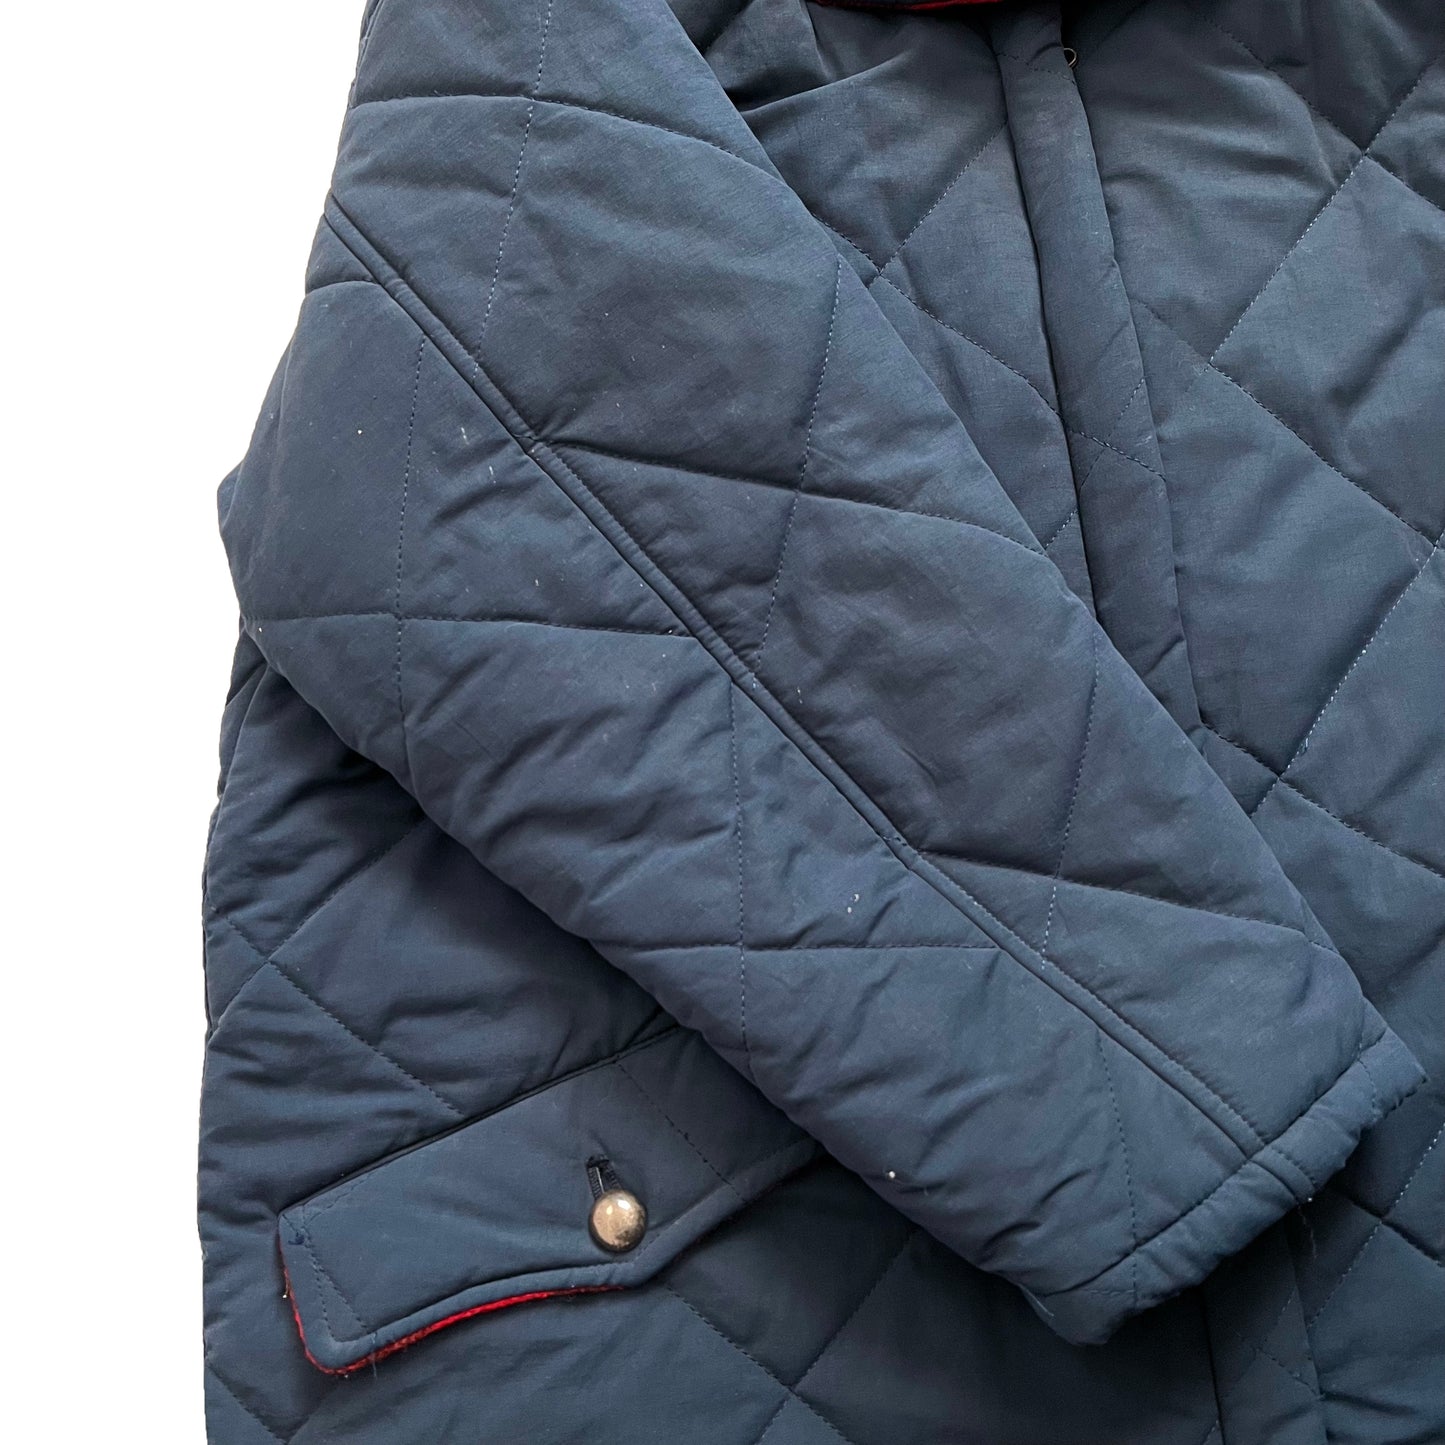 90's EMPORIO ARMANI PUFFER JACKET "MADE IN ITALY"